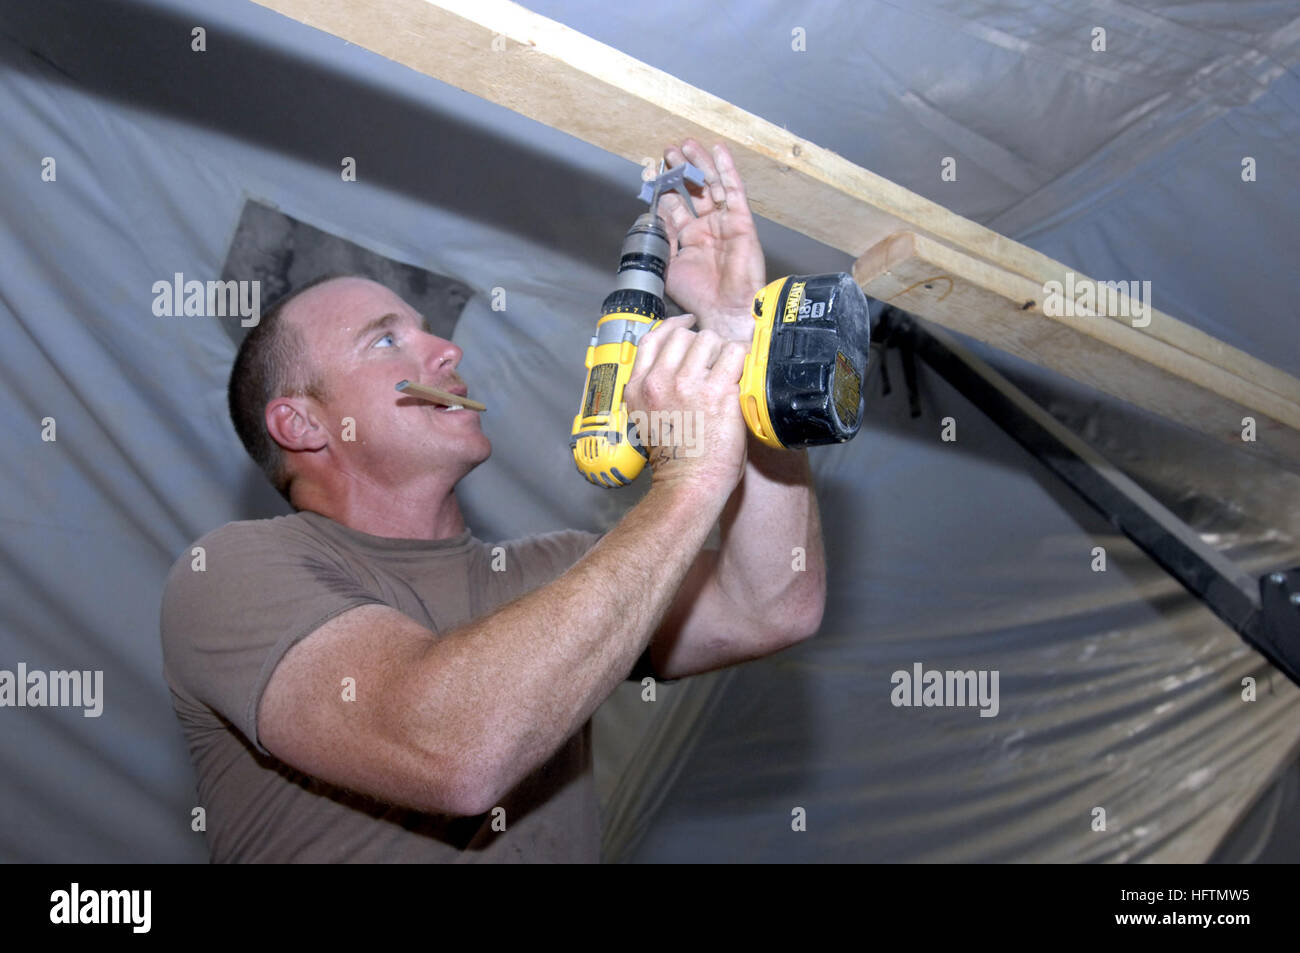 070426-N-4928M-055 COMBAT OUTPOST RAWA, Iraq (April 26, 2007) - Builder 2nd Class Gregory Winters, a Navy Reservist from Tyler, Texas, prepares to hang fixed lighting in a 1st Light Armored Reconnaissance Battalion housing tent at Combat Outpost Rawa. Tyler is assigned to Naval Mobile Construction Battalion (NMCB) 28. The regiment, commanded by Capt. Katherine Gregory, provides critical construction for the 2nd Marine Expeditionary Force (II MEF) in support of the global war on terrorism. U.S. Navy photo by Senior Chief Mass Communication Specialist Jon E. McMillan (RELEASED) US Navy 070426-N- Stock Photo